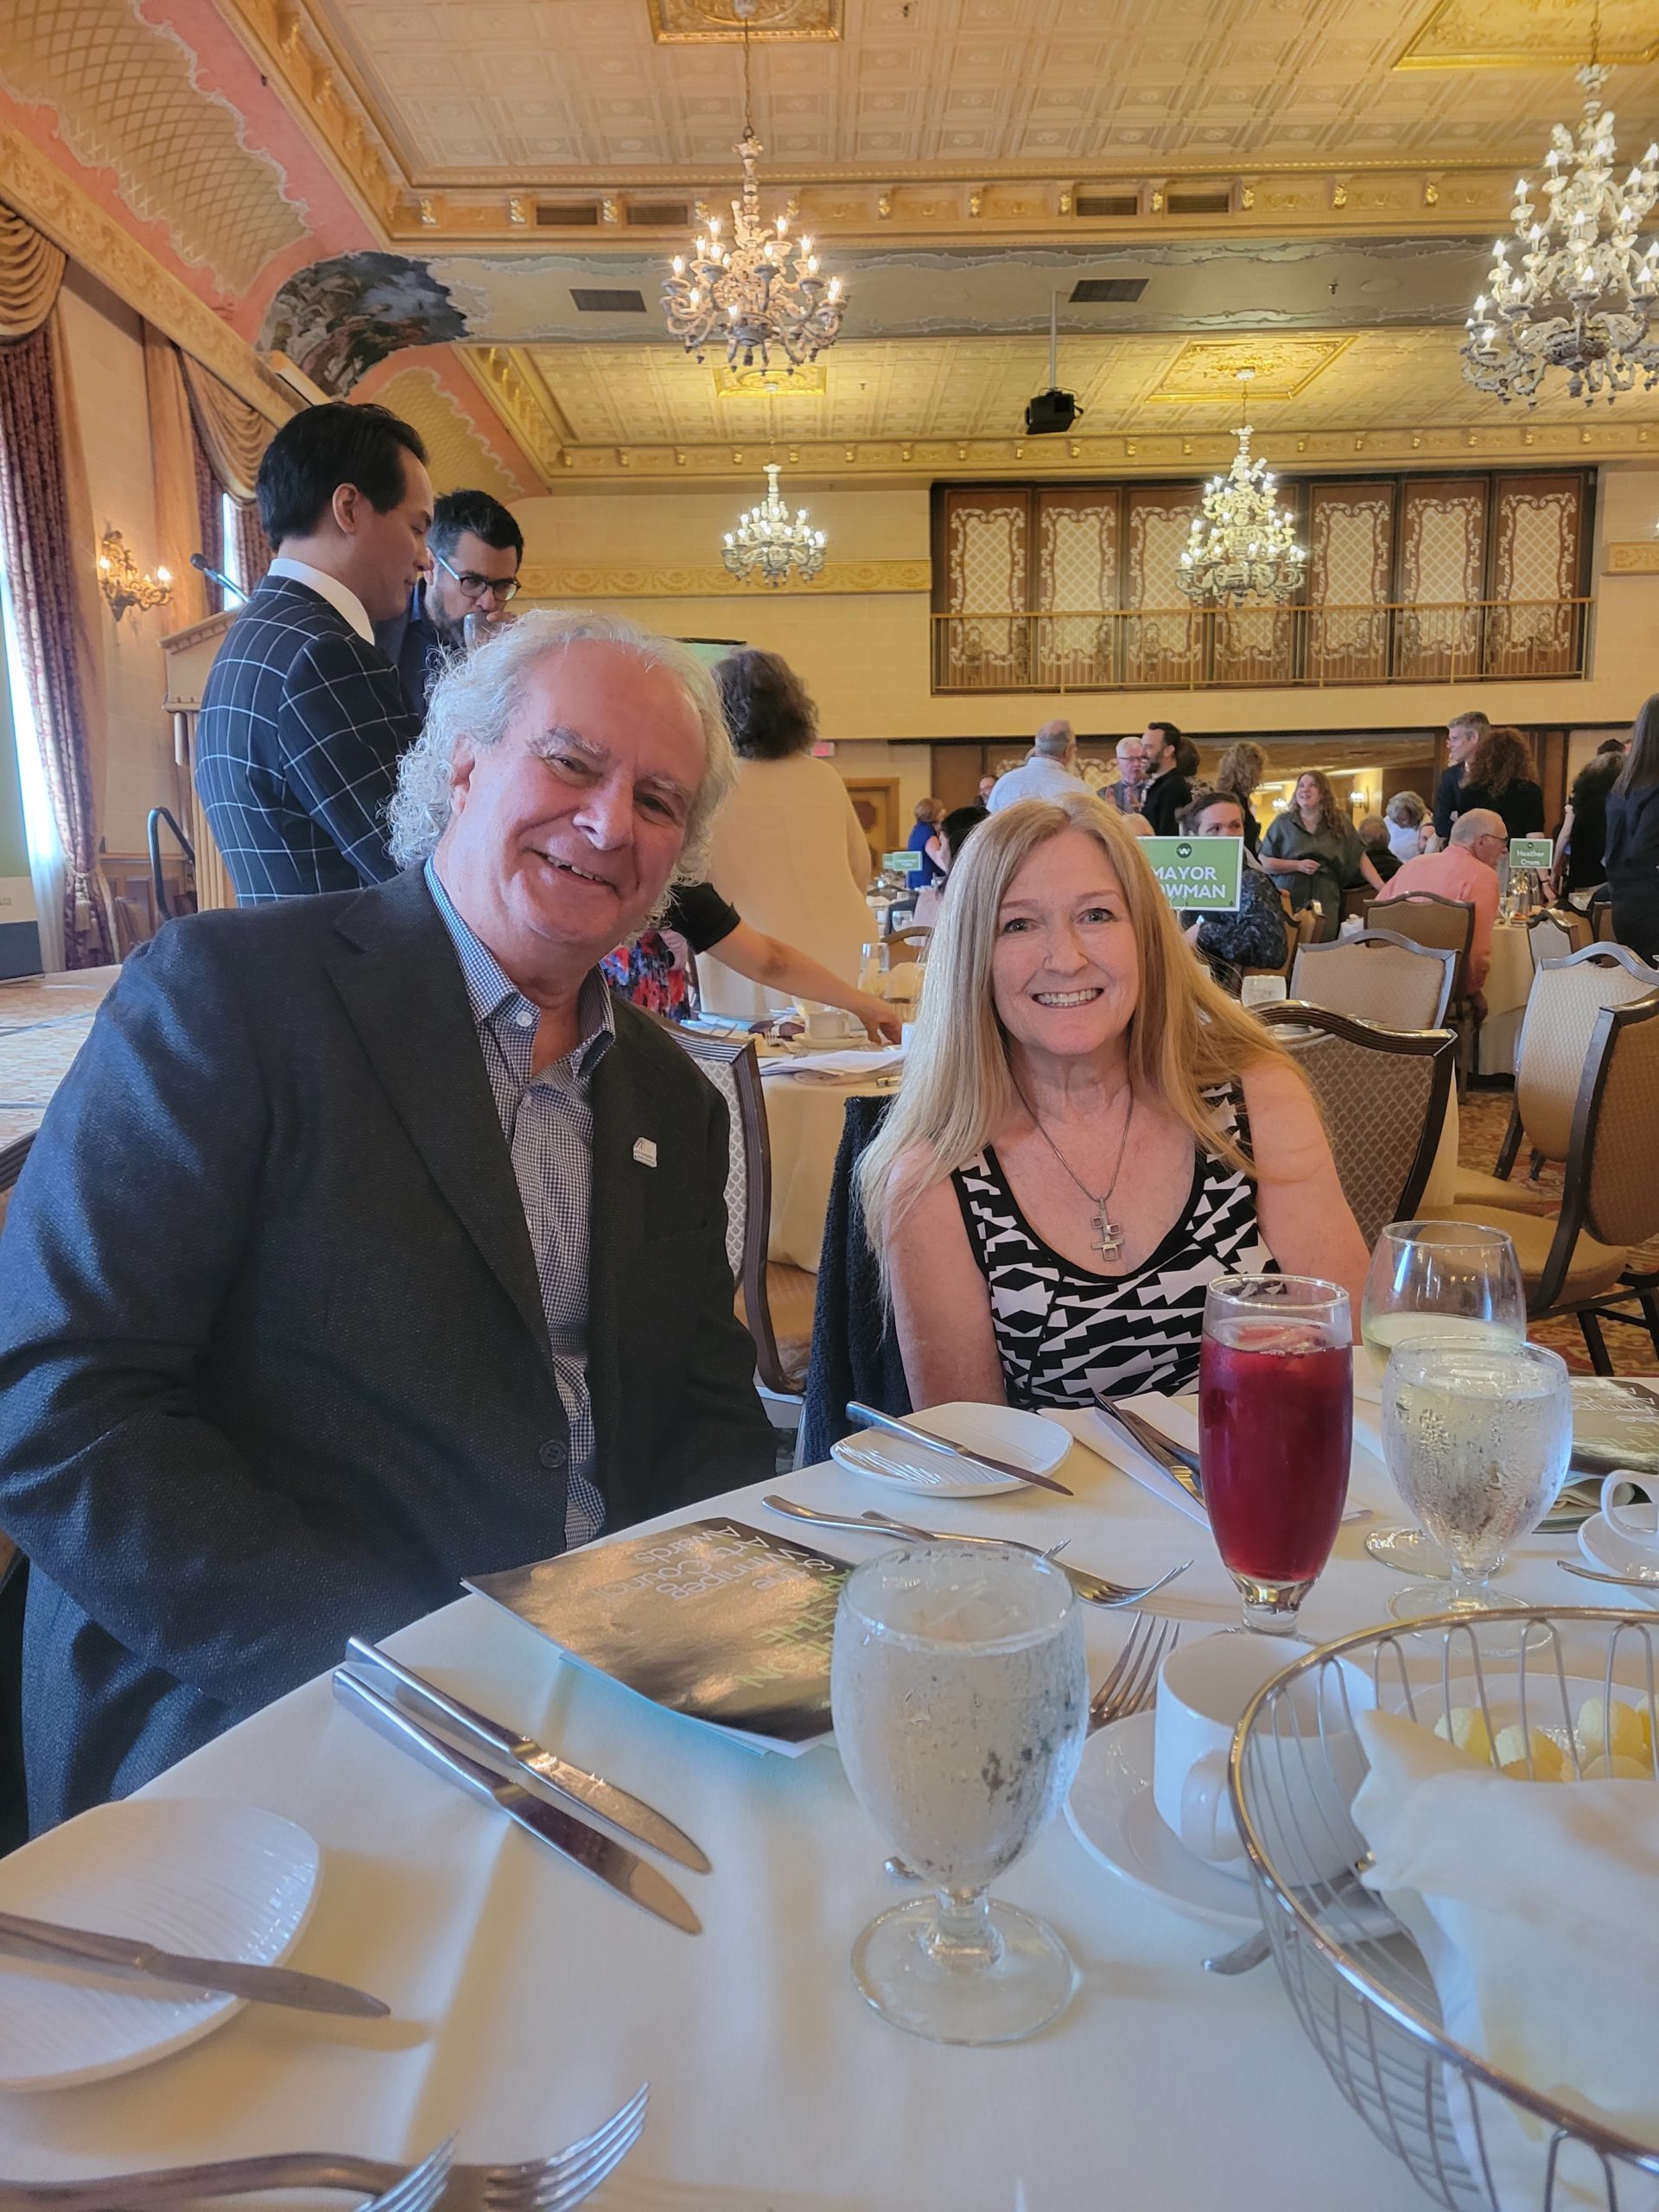 Photograph of Susan Lamberd and Robert Fabro at a dining table at the Fort Garry hotel. Robert is a white man in his 60s with grey hair and is wearing a grey suit jacket and stripped blue and white shirt. Susan is a white woman in her 50s with long strawberry coloured hair and is wearing a black and white dress. They are both smiling at the camera. In the background you can see many tables and other folks who attended the event. The space is very fancy with chandeliers, heavy curtains and a goldish ceiling.